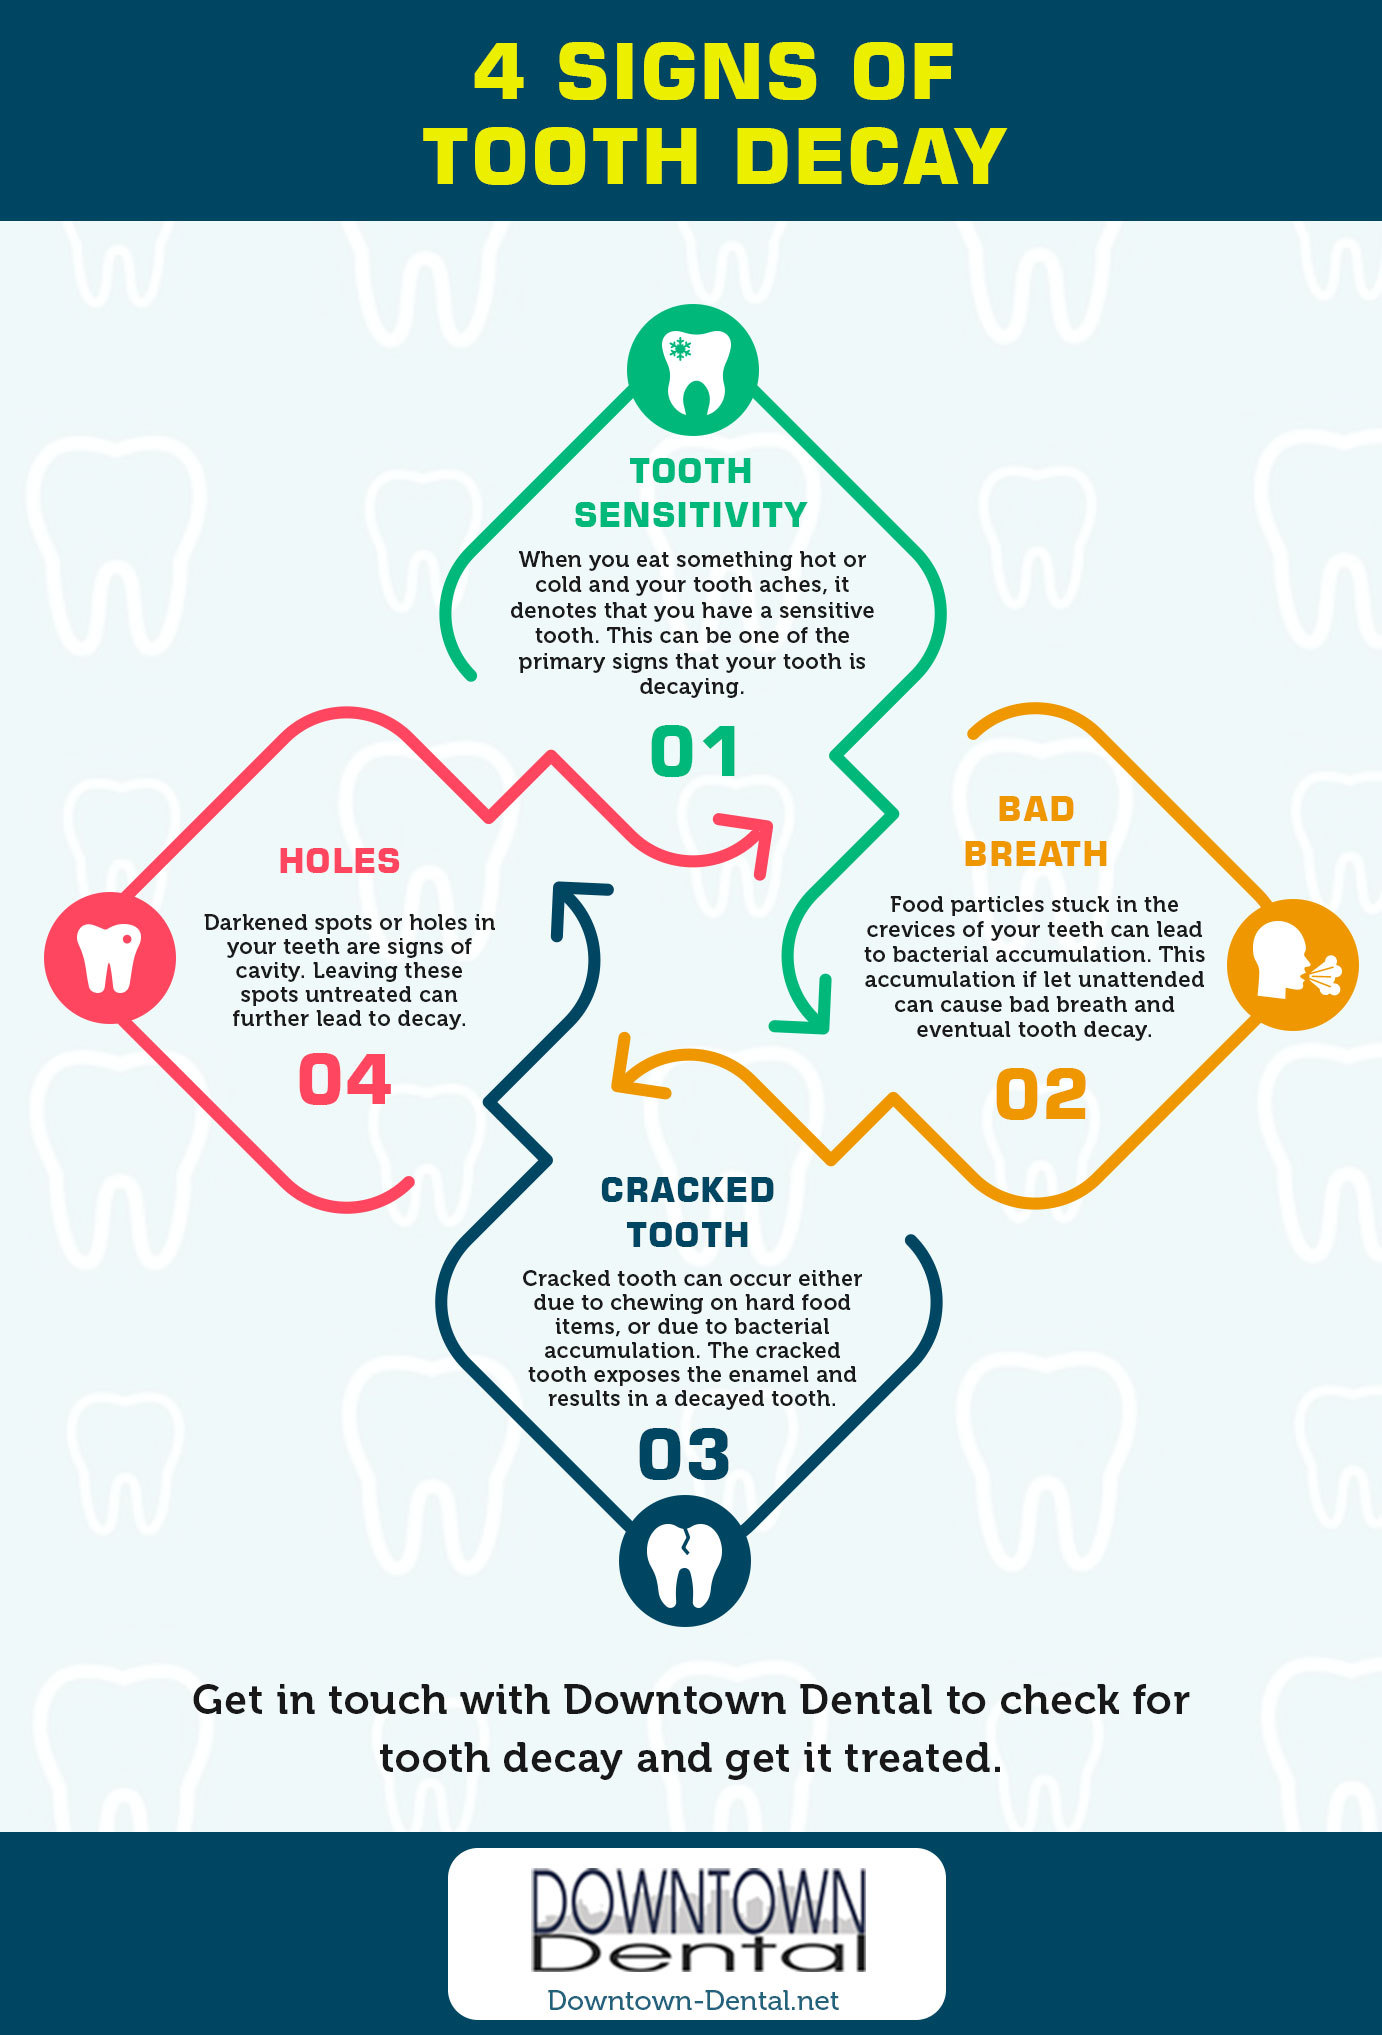 Signs of Tooth Decay